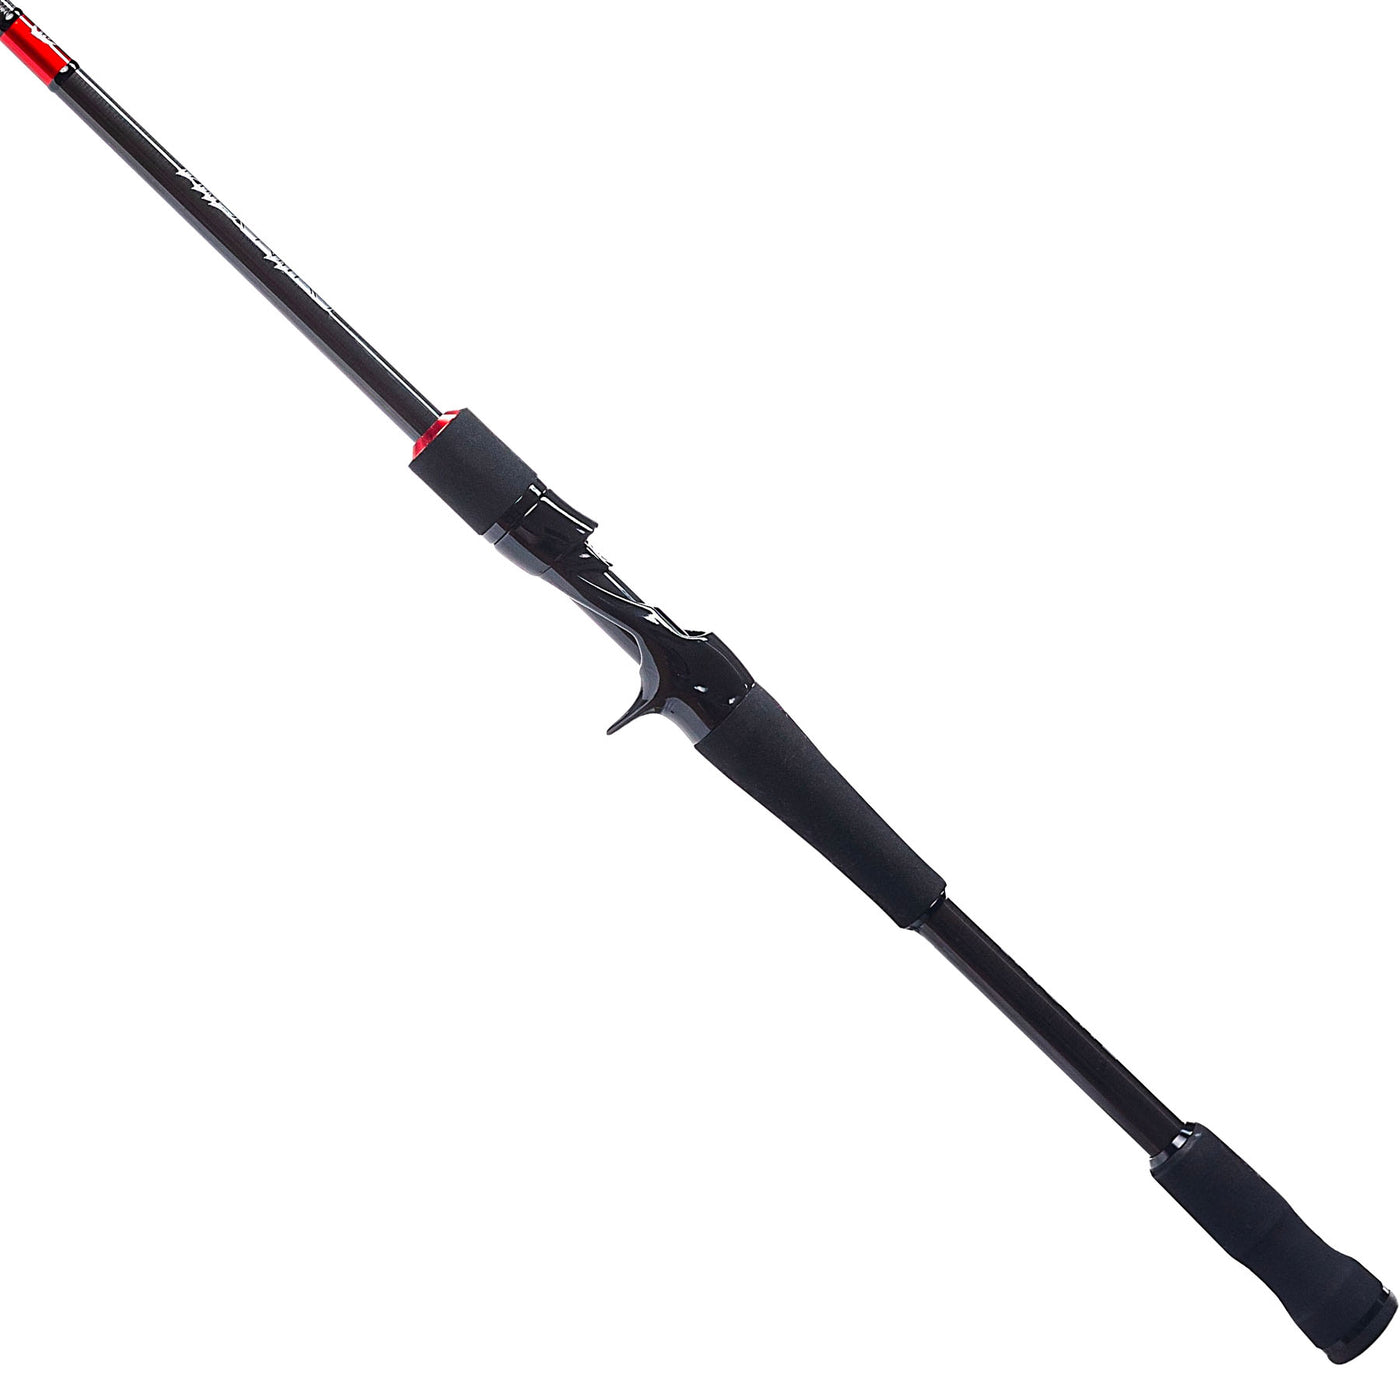 Best 2 Piece Casting Rod In 2020 – Reviews Of Top Most Products